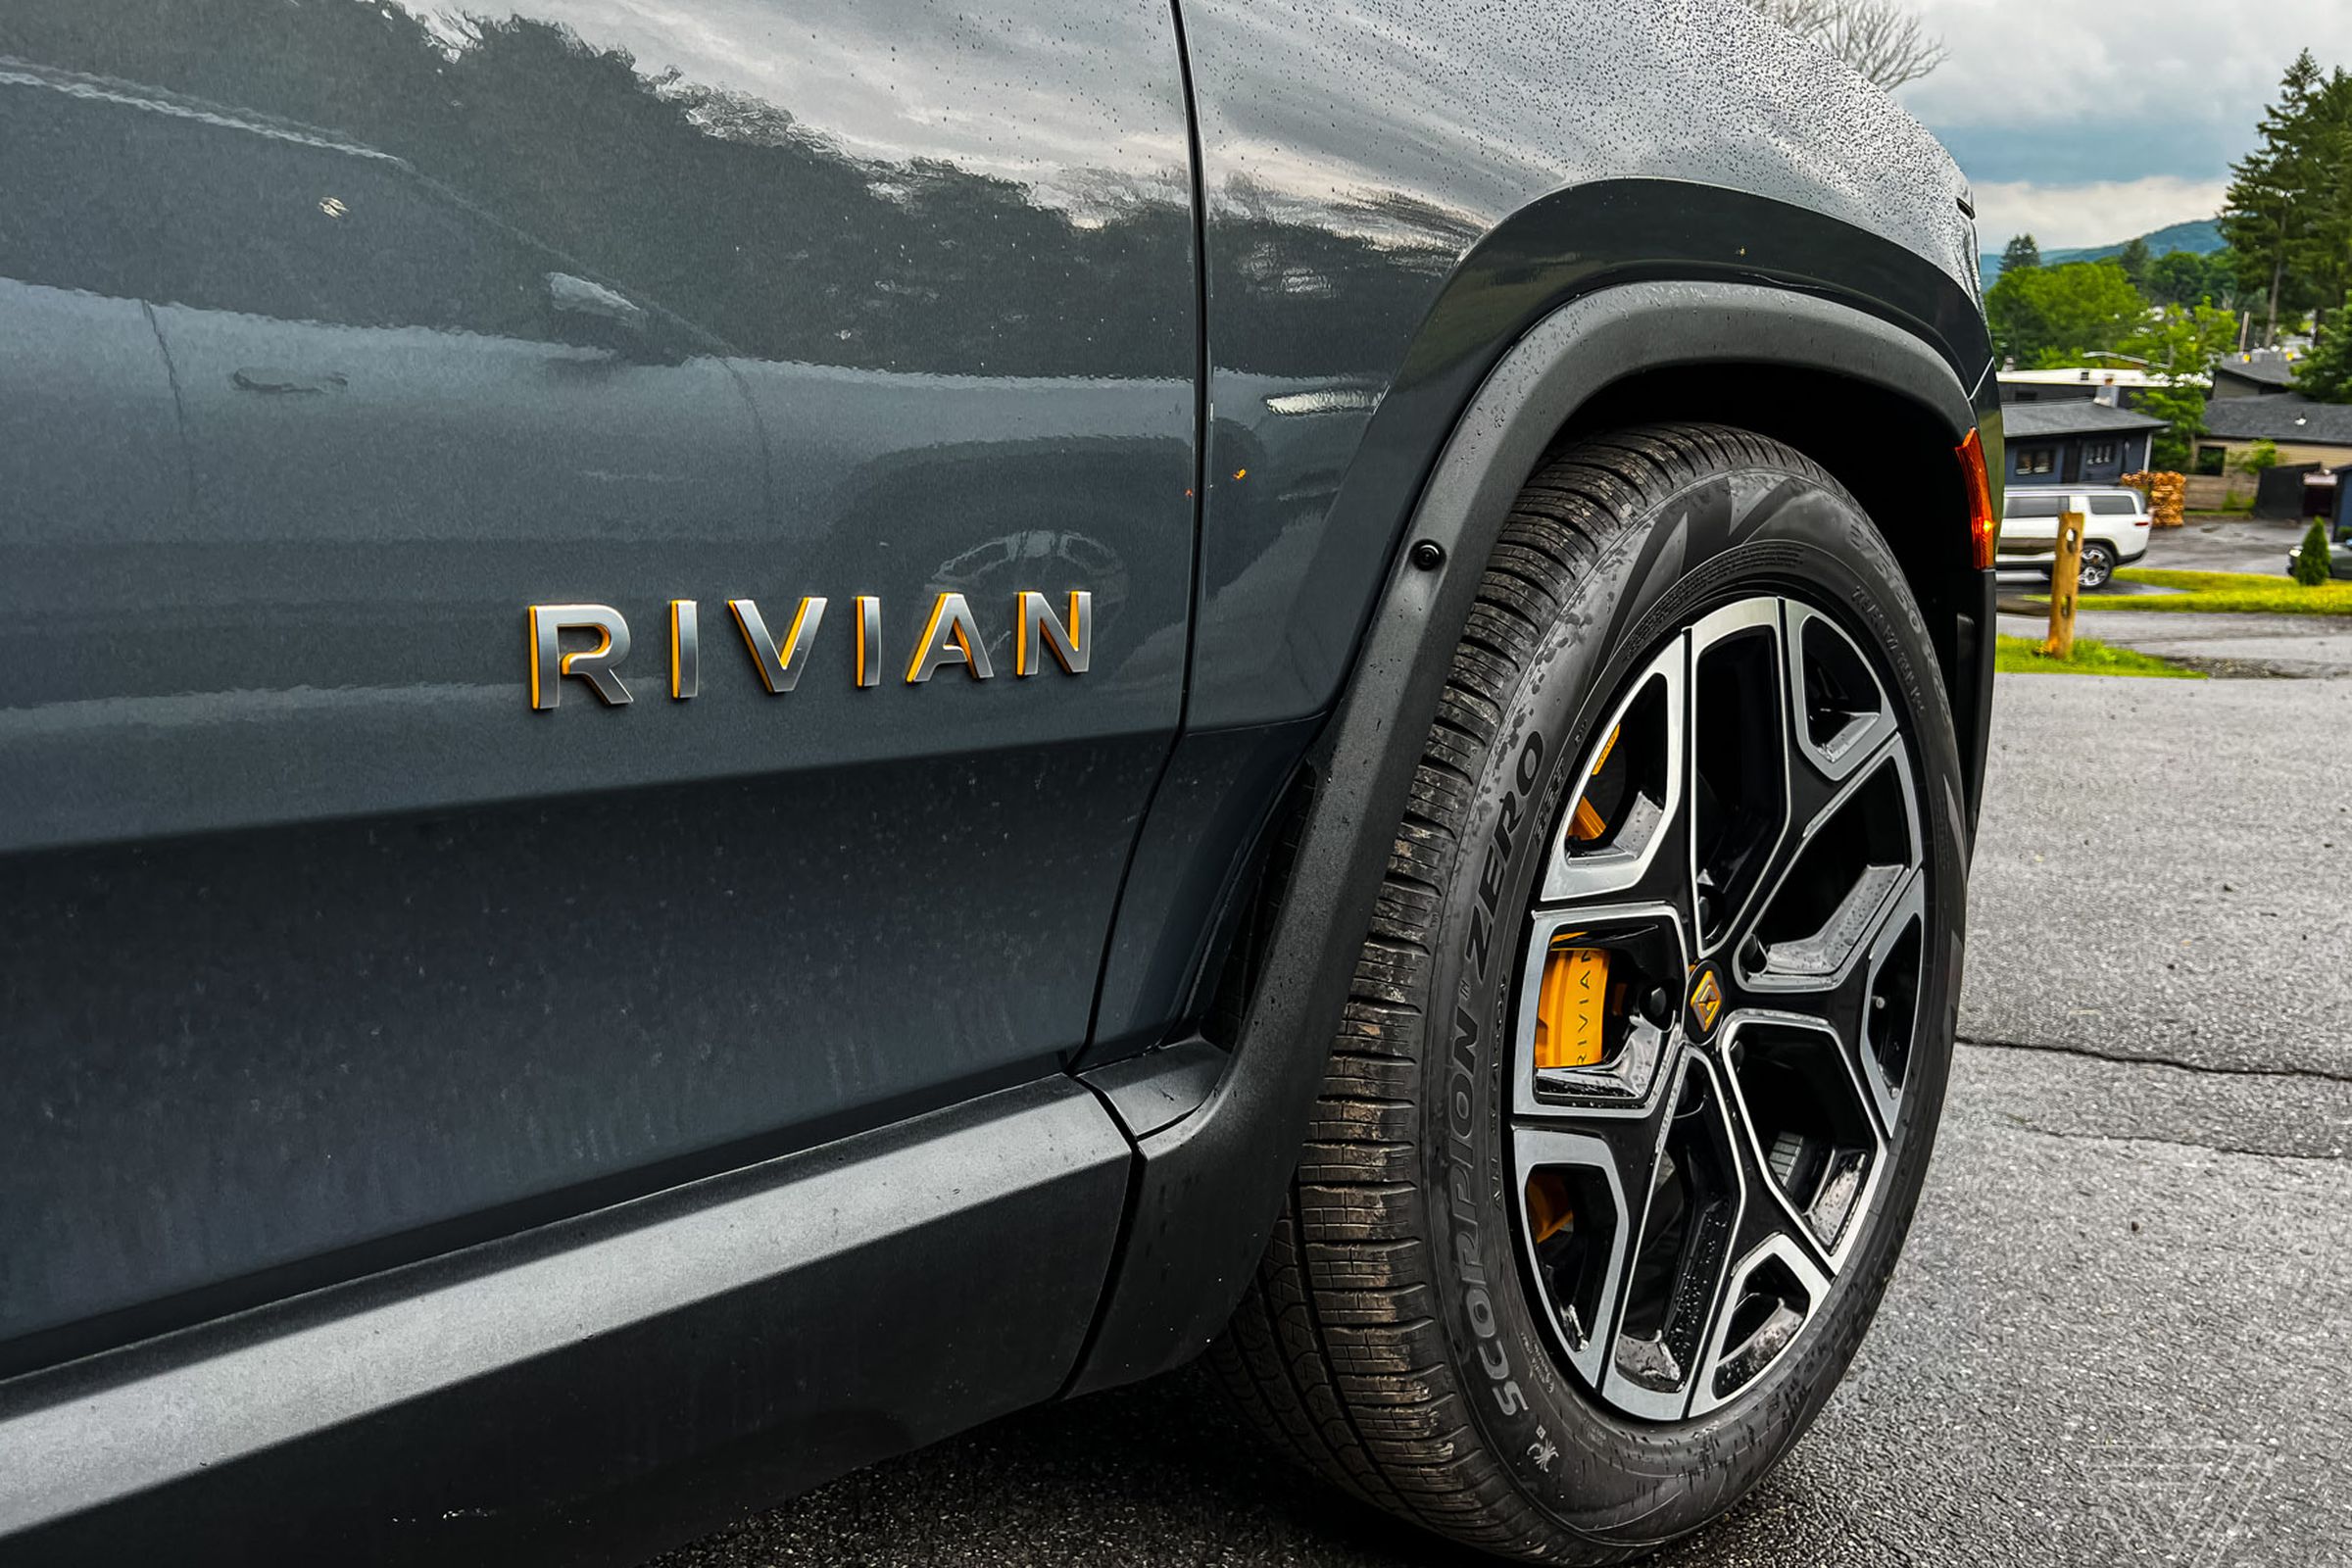 Rivian logo on the side of its R1S SUV